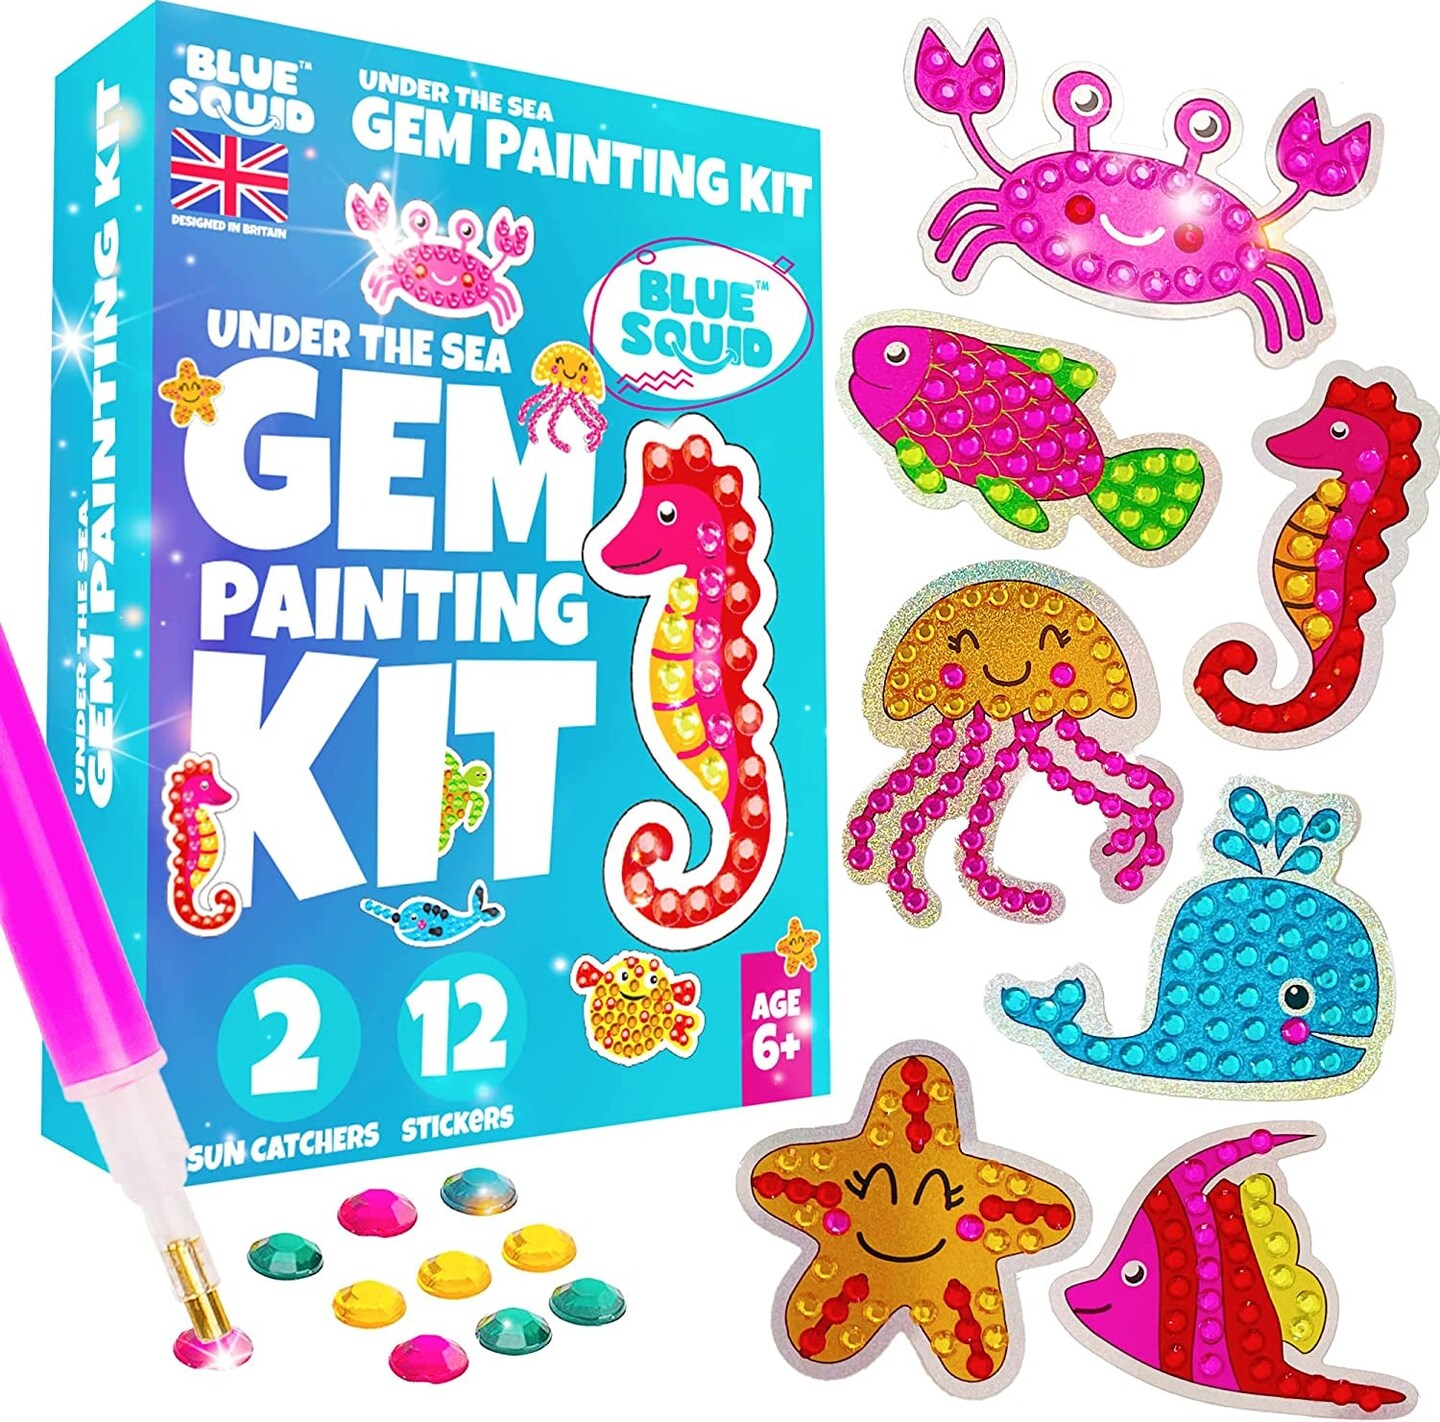 Kids 5D Diamond Painting Art Kits: Art and Crafts for Boys Girls